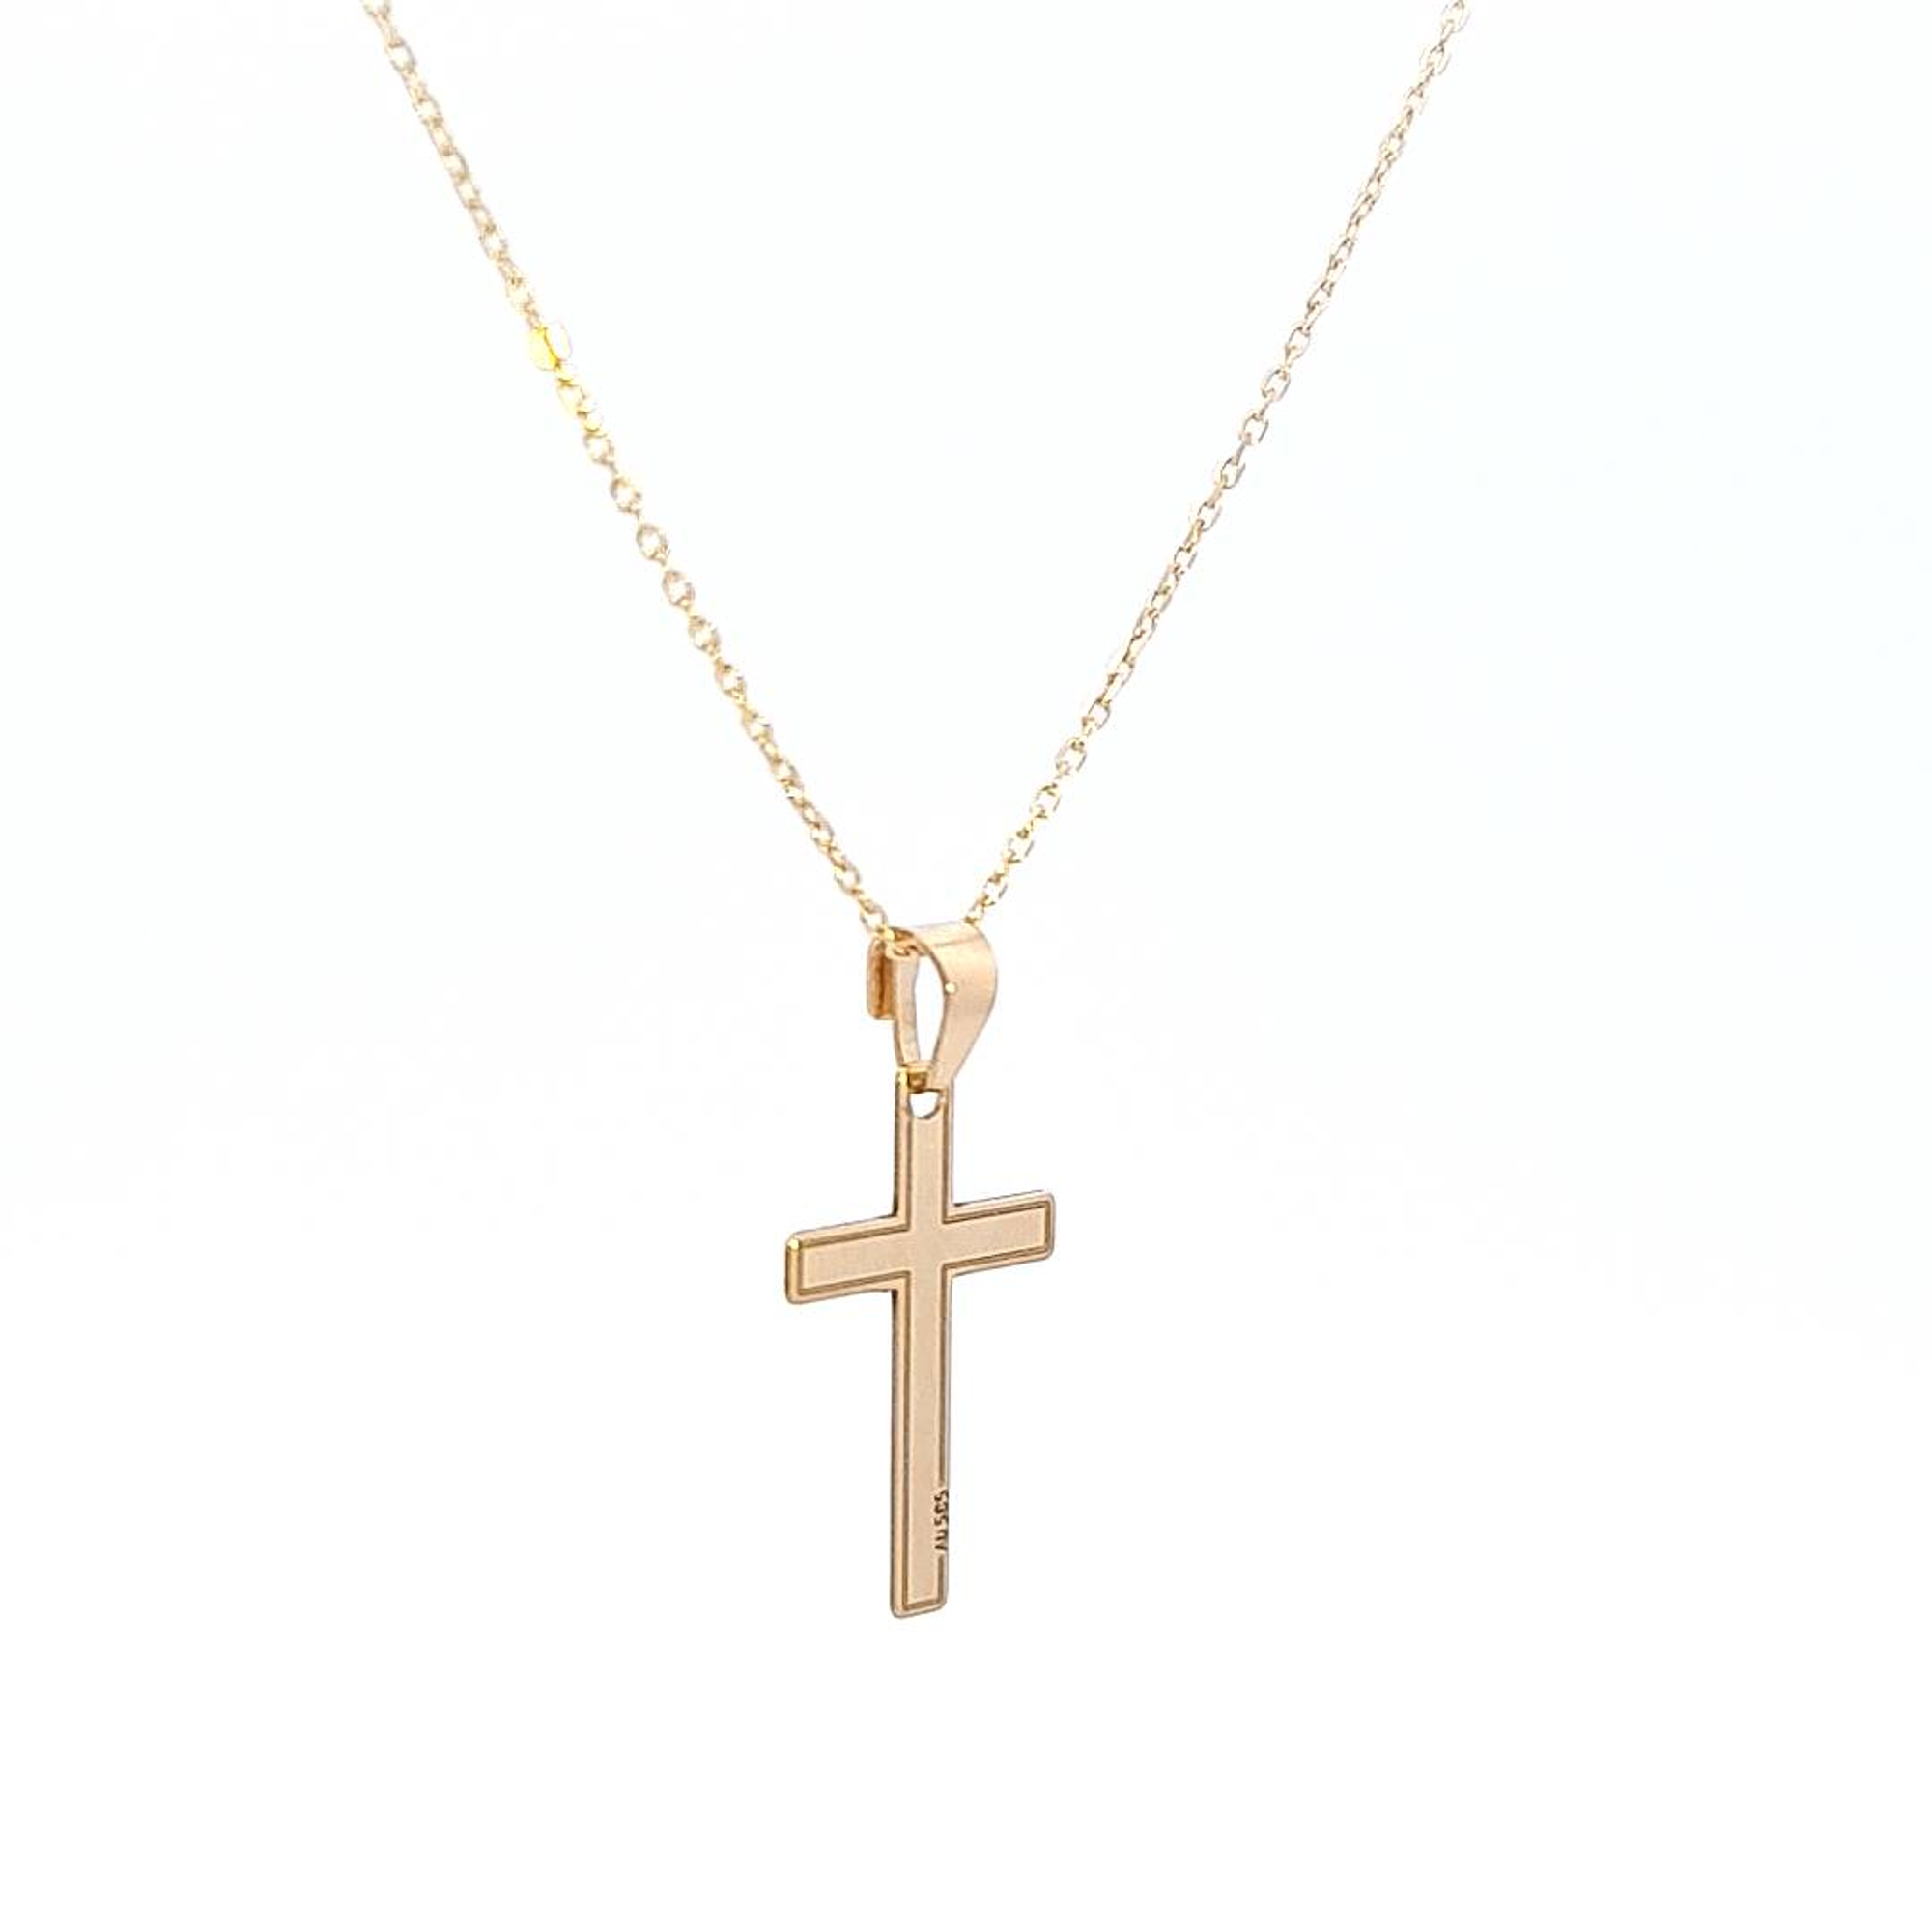 Faith's 14k Gold Cross Necklace - Side view highlighting the slender profile of the 0.30mm thick gold cross pendant